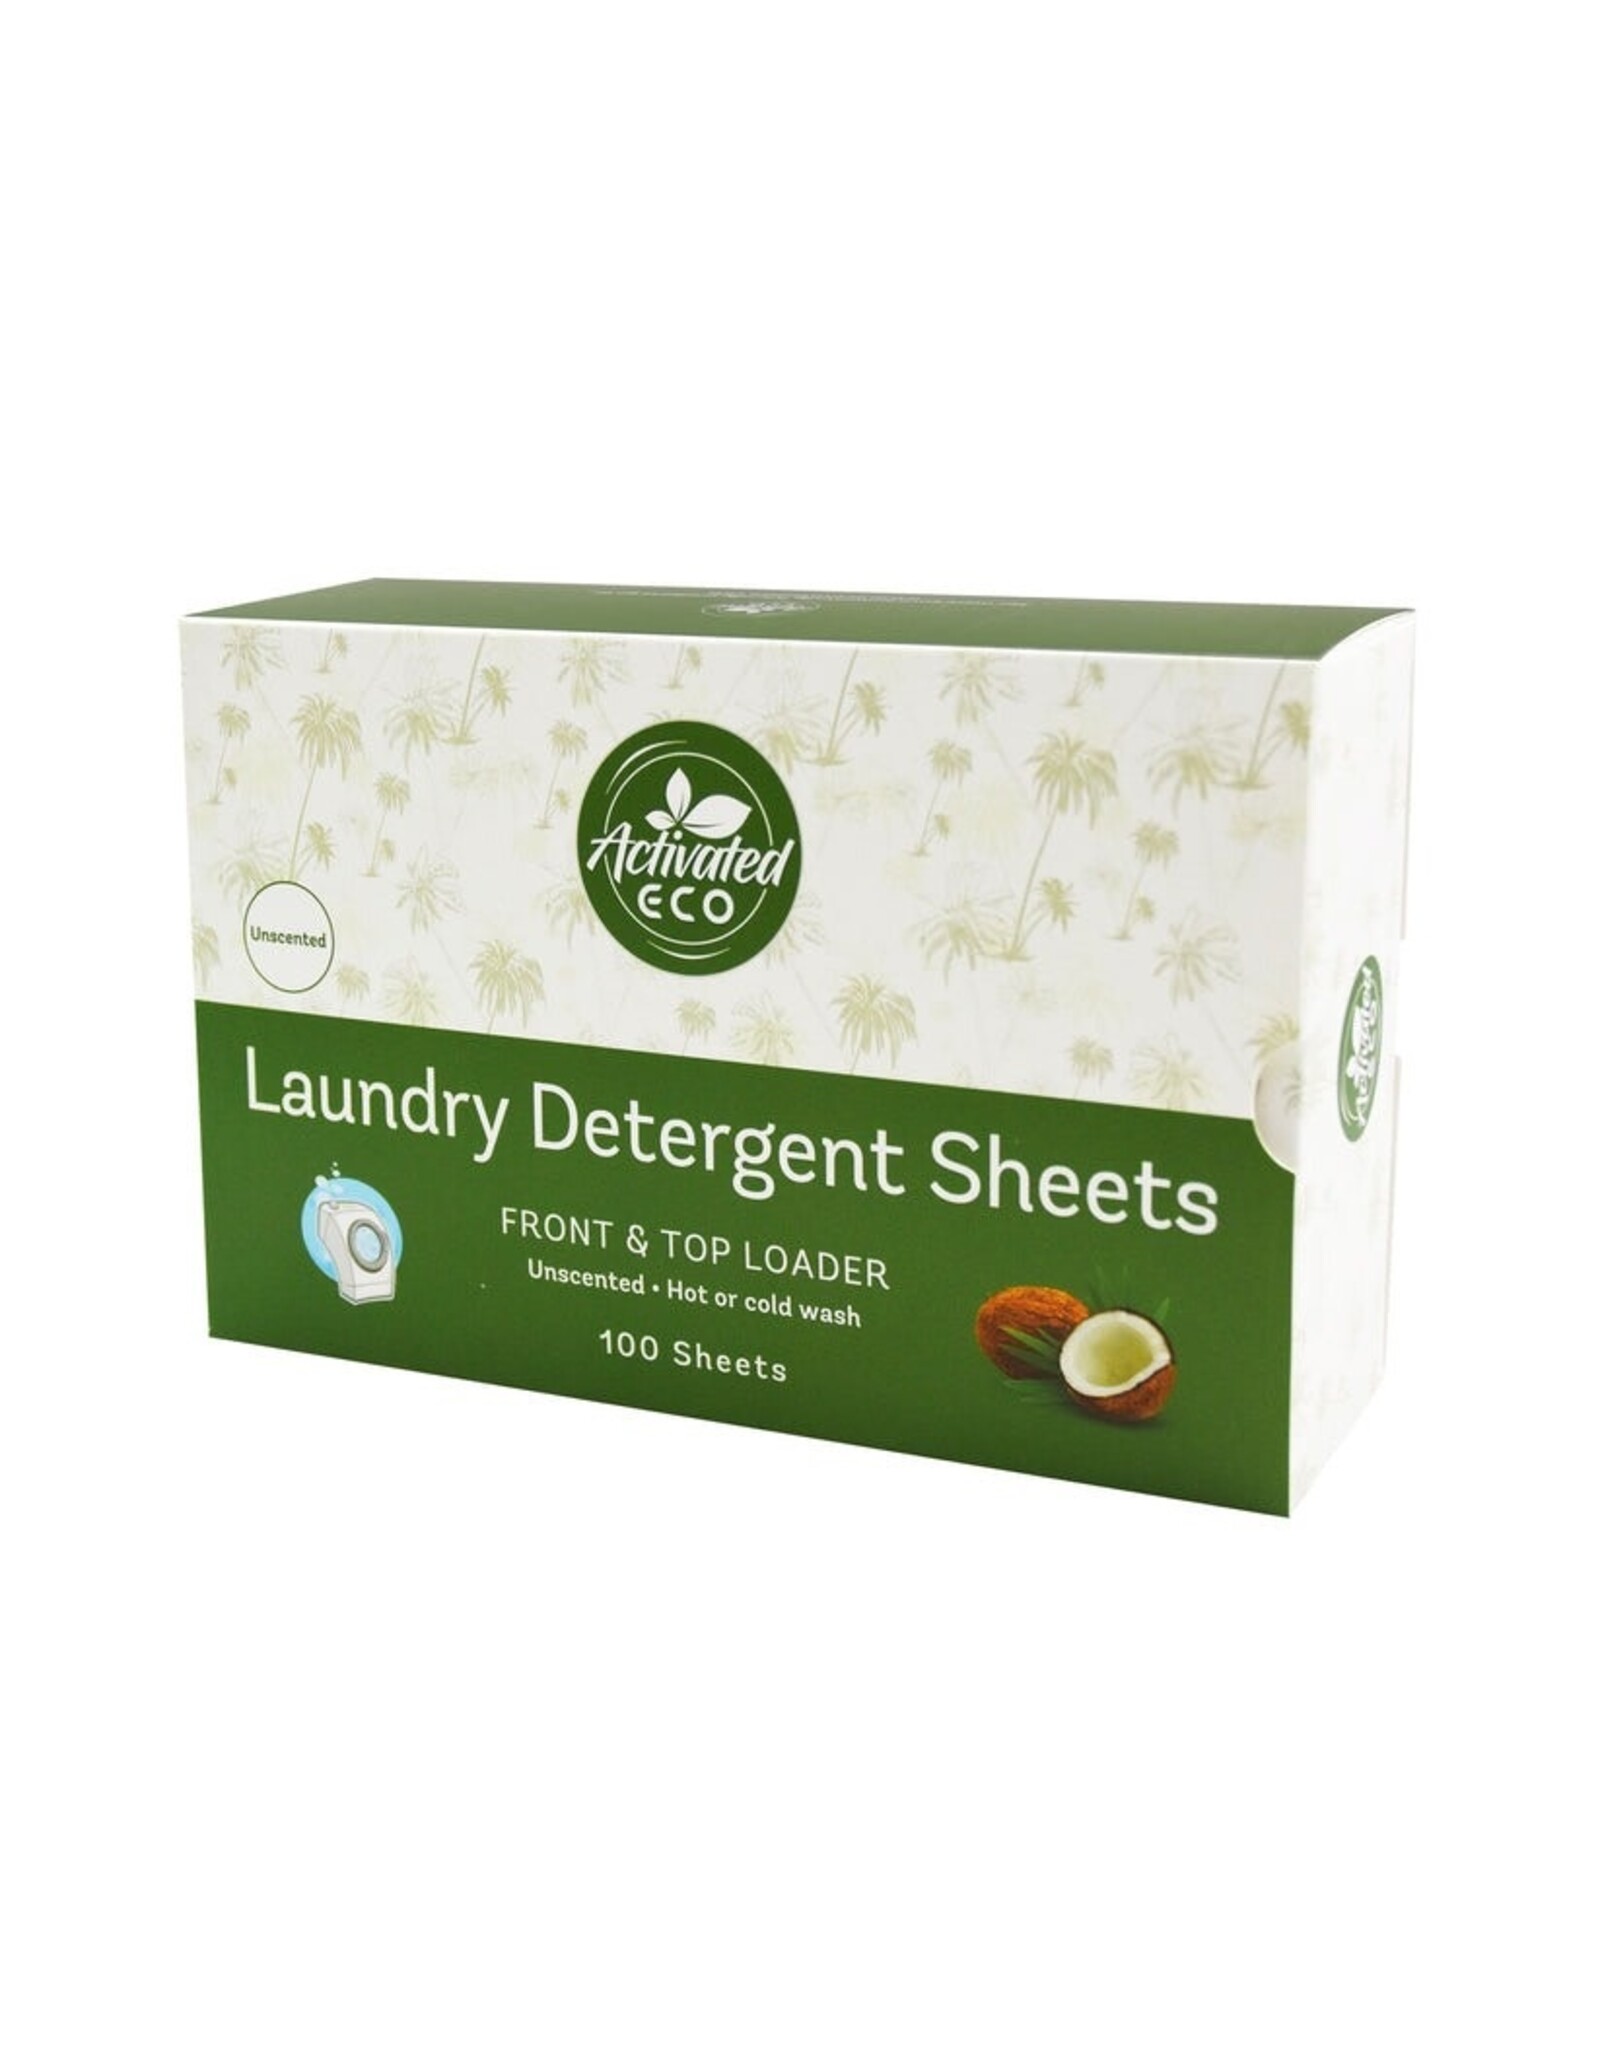 Activated Eco Wholesale Laundry Detergent Sheets - Unscented 100 pack